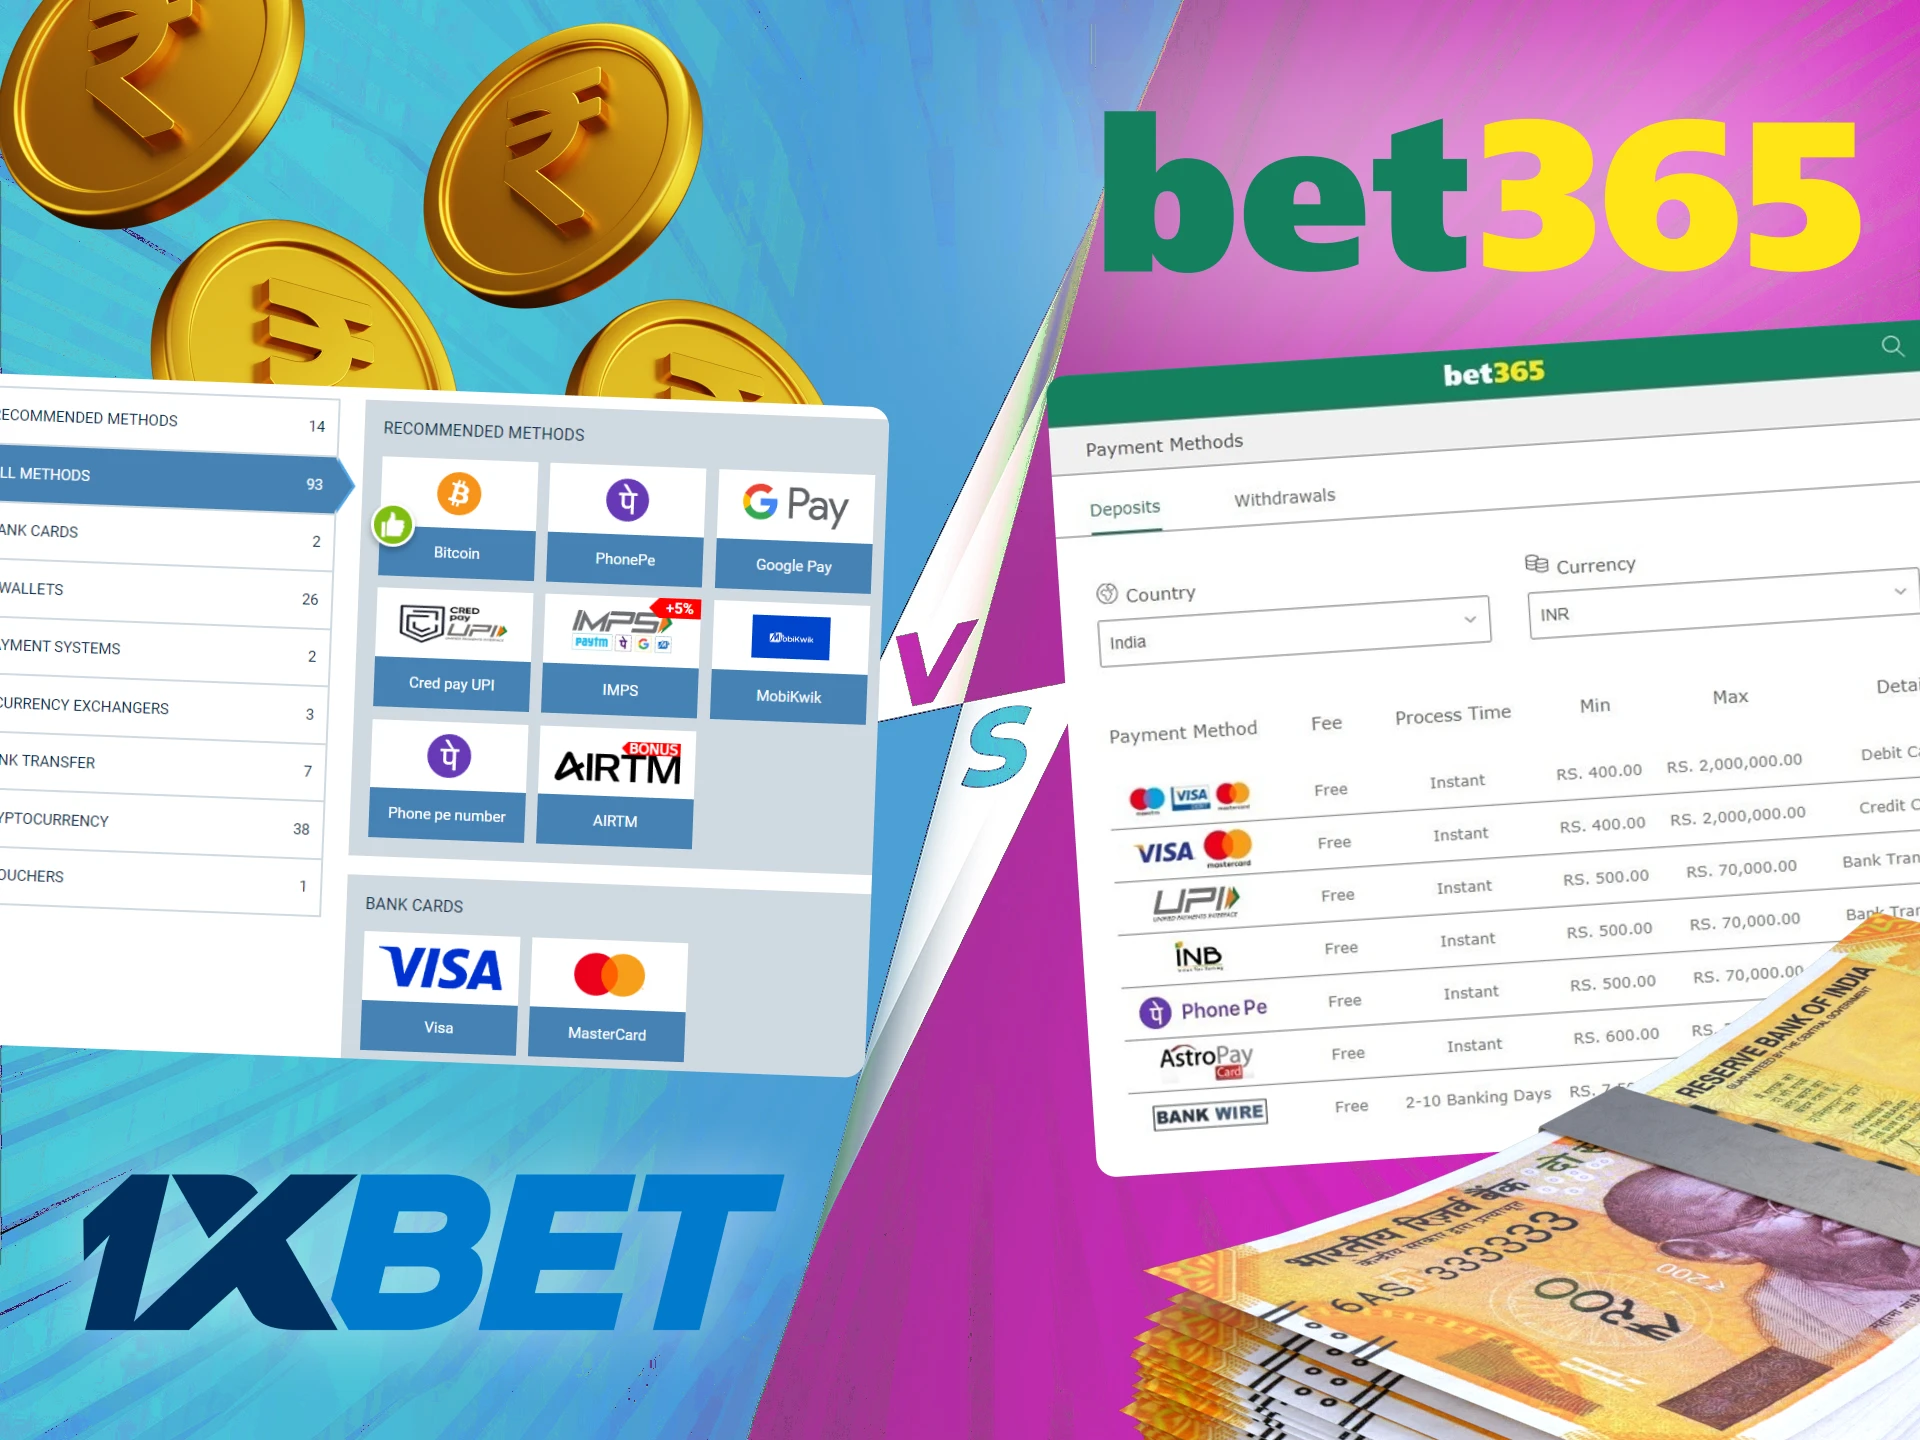 Compare the differences between 1xbet and bet365 deposit and withdrawal methods.